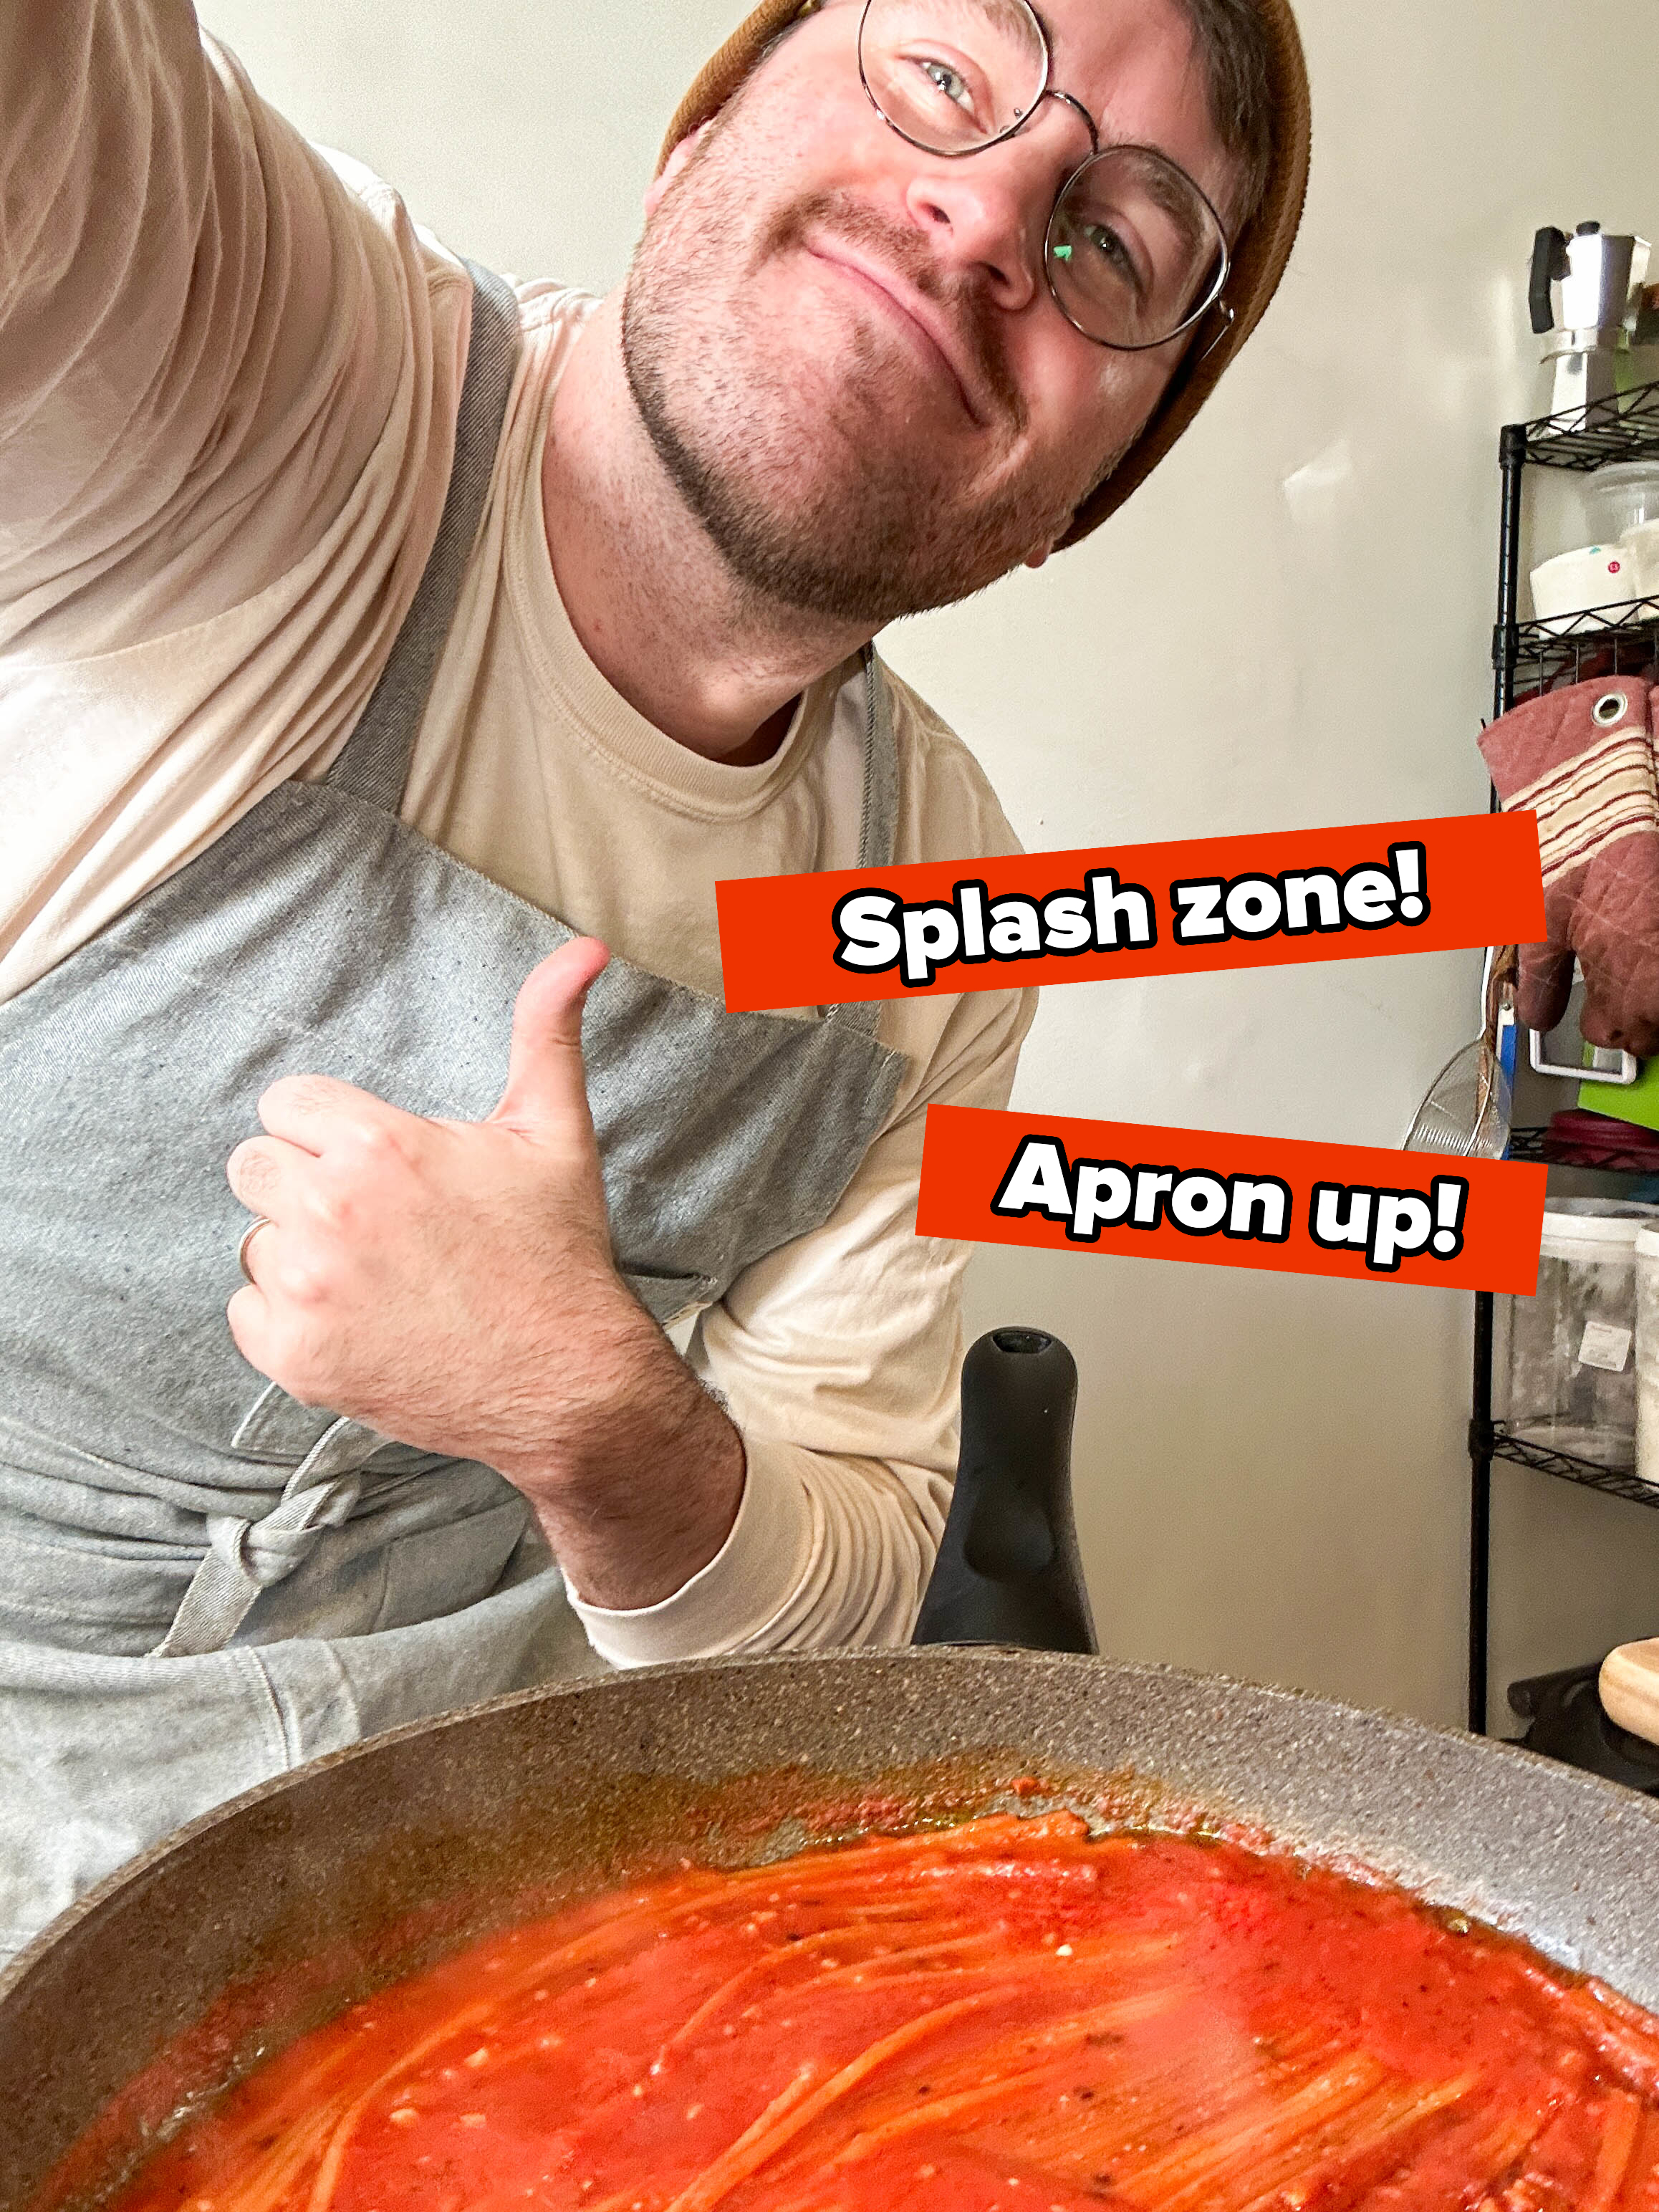 Person giving a thumbs-up over a large pan of sauce. They wear an apron and glasses, smiling at the camera with text saying splash zone and apron up